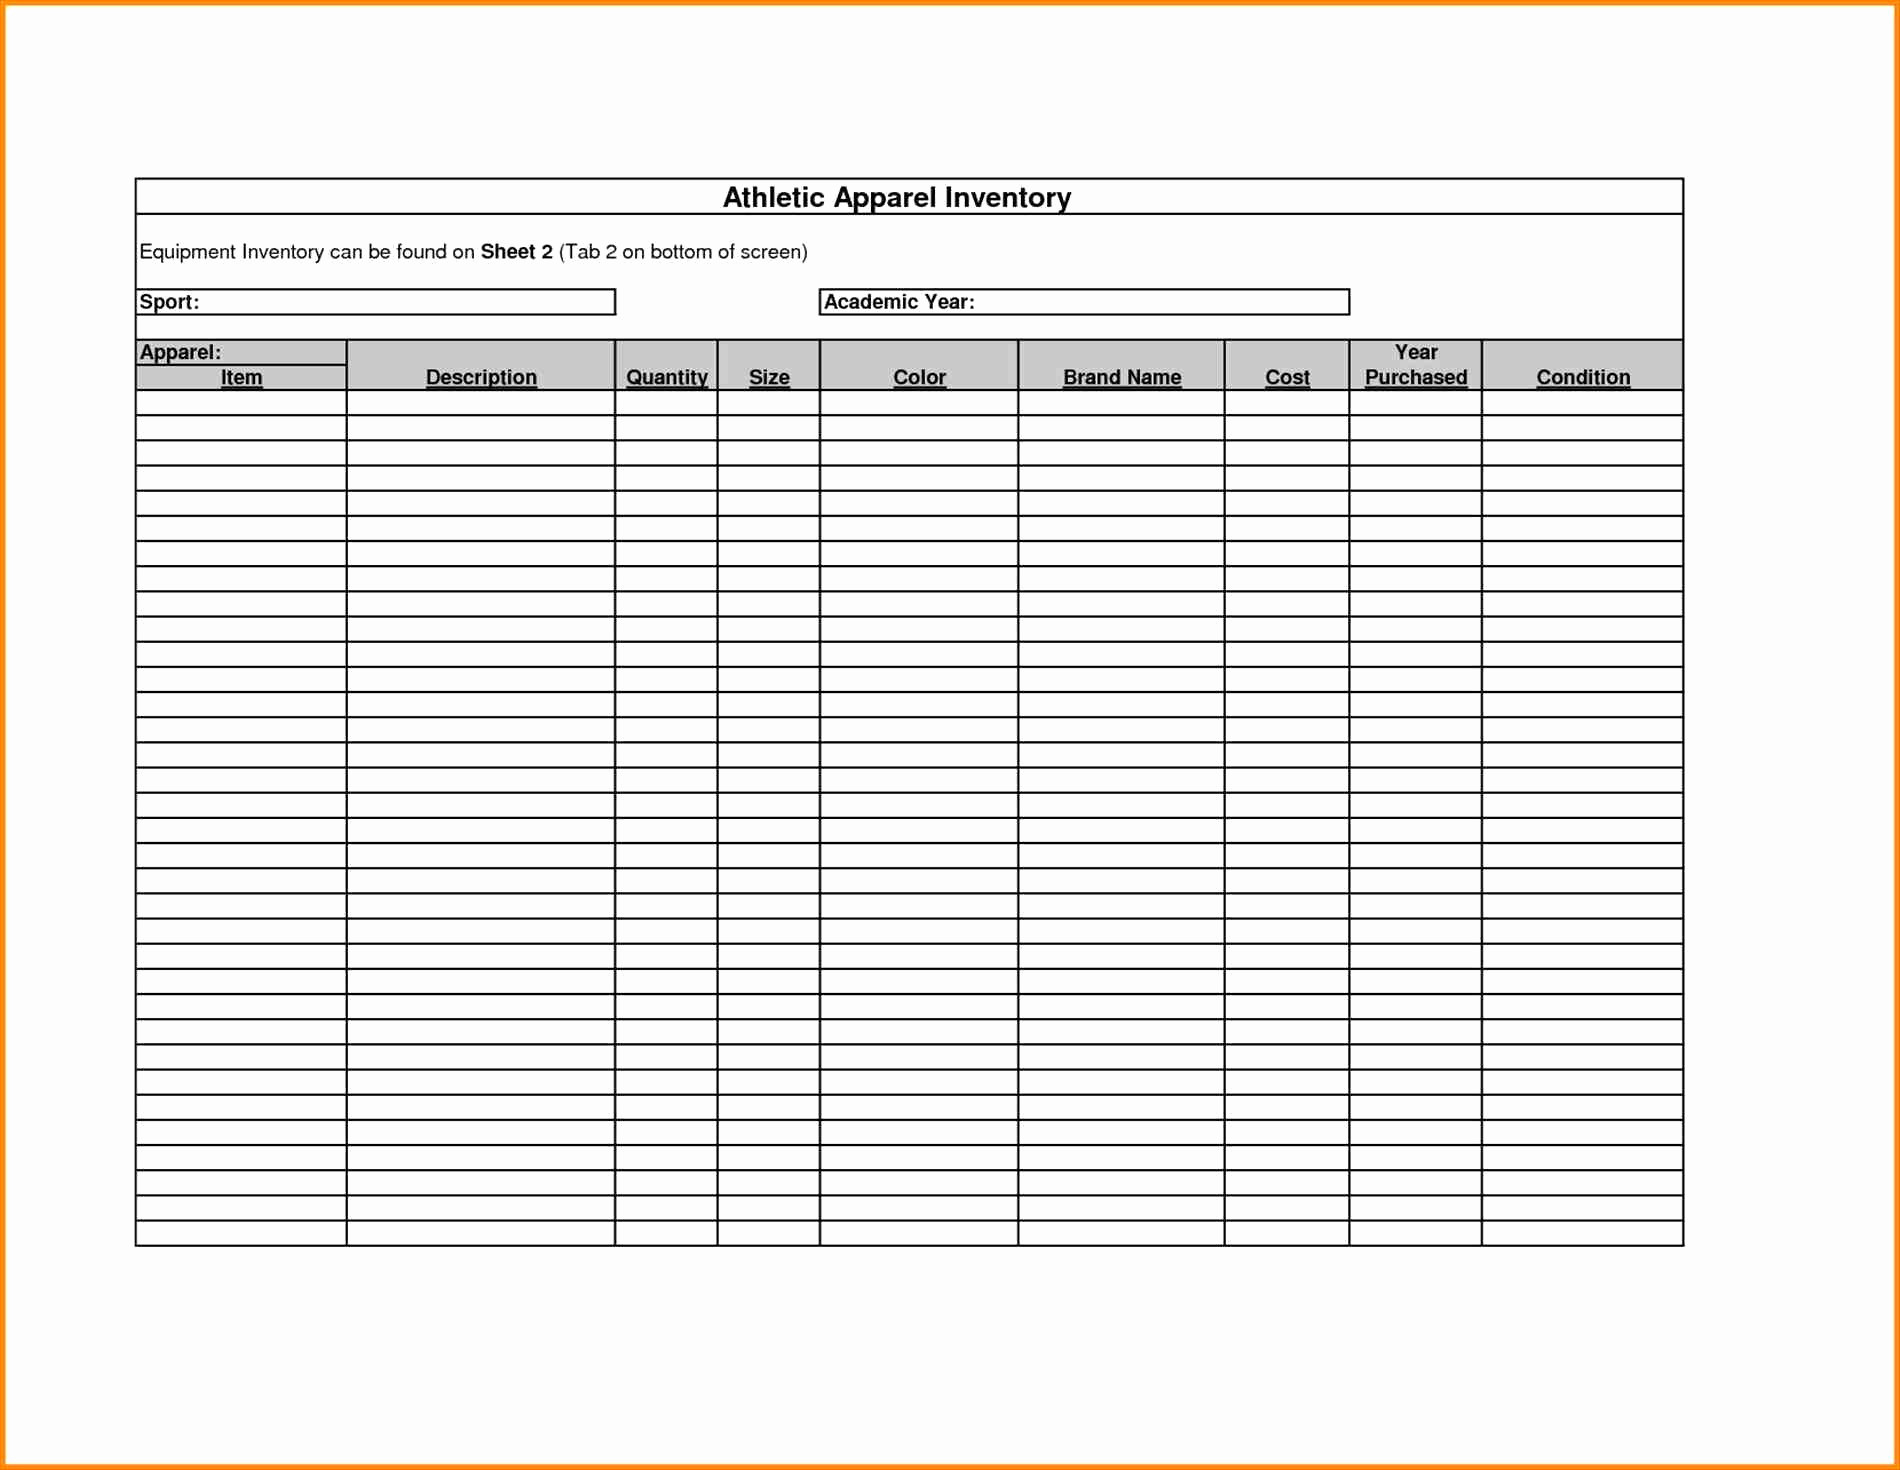 Spreadsheet Example Of Business Inventory Small Template | Pianotreasure Intended For Business Inventory Spreadsheet